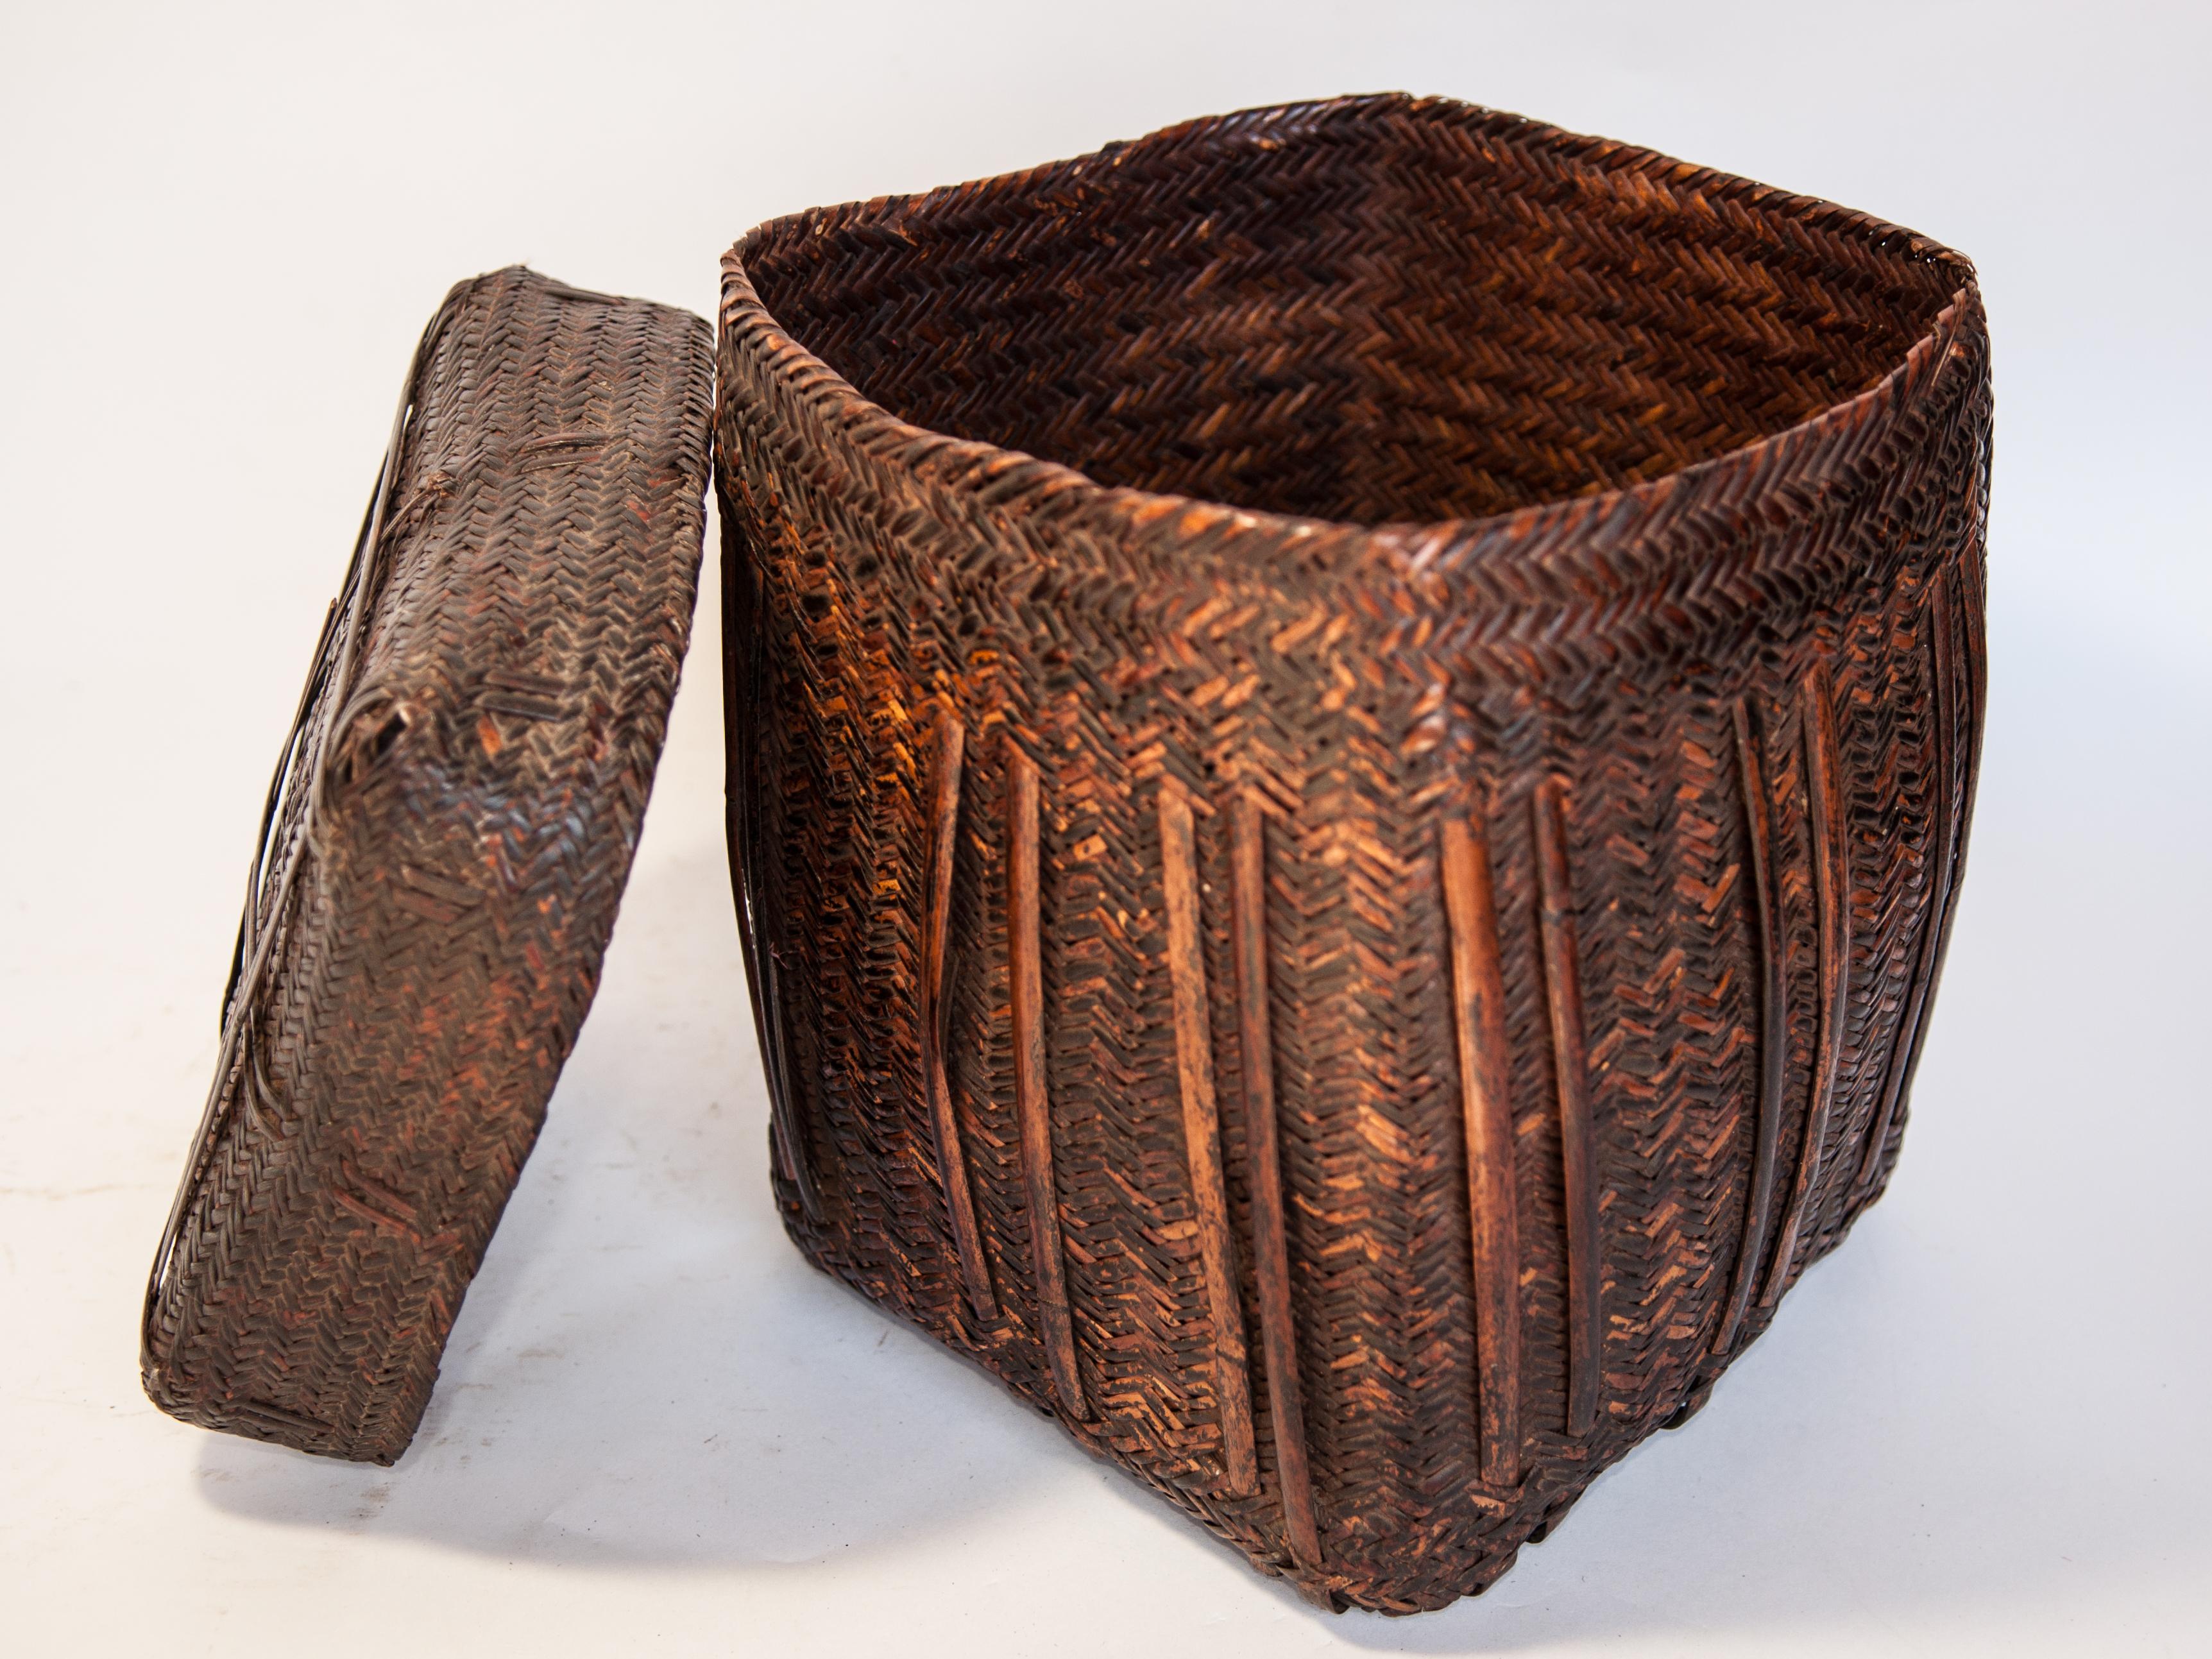 Rustic Tribal Storage Basket with Lid from the Tamang of Nepal, Mid-20th Century 4